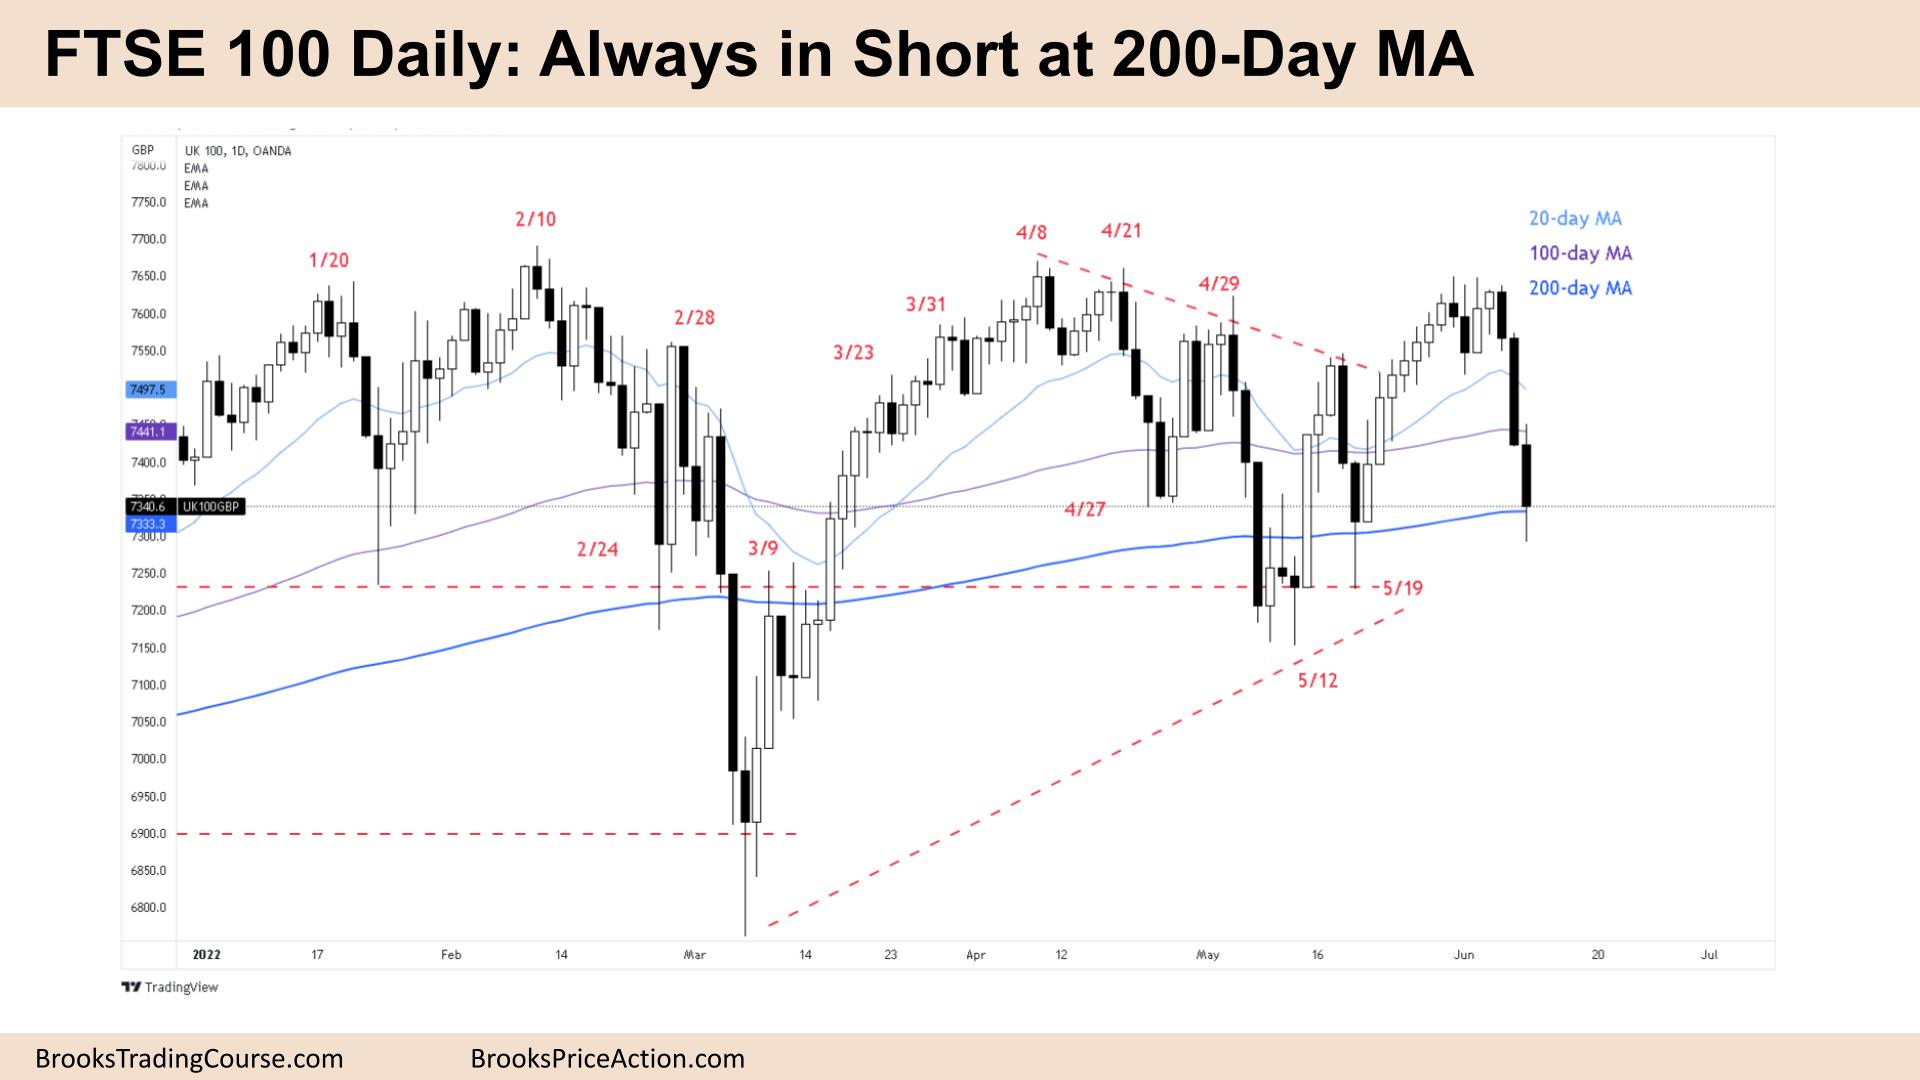 FTSE 100 Daily Chart Always in Short at 200 Day MA